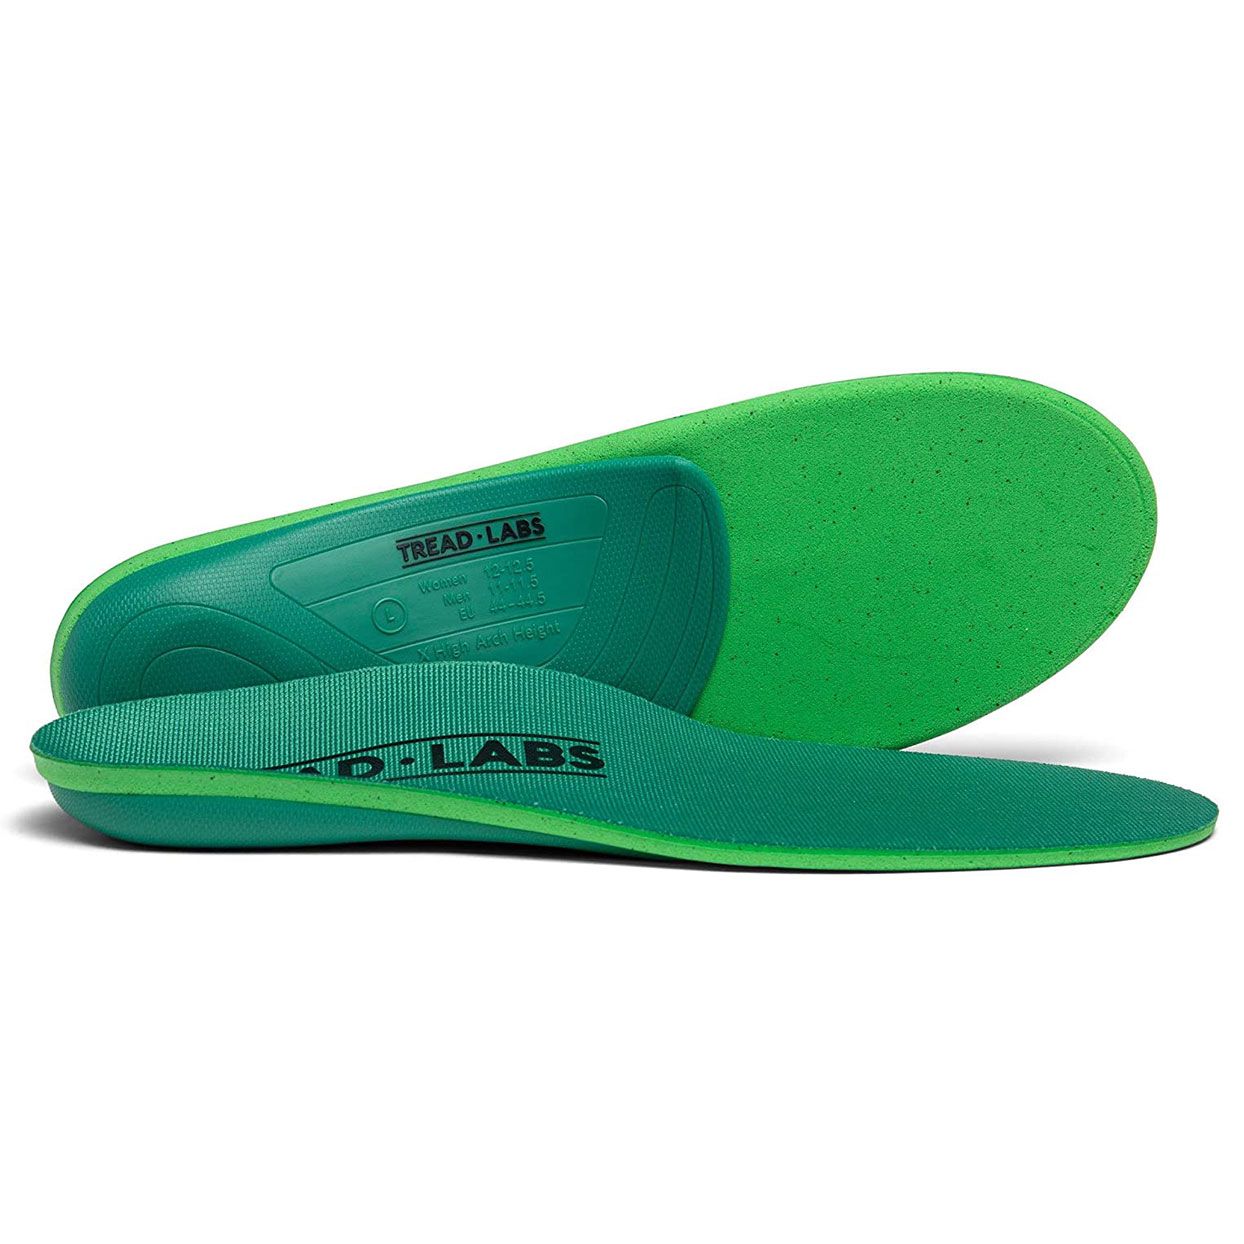 tread-labs-insoles-foot-pain